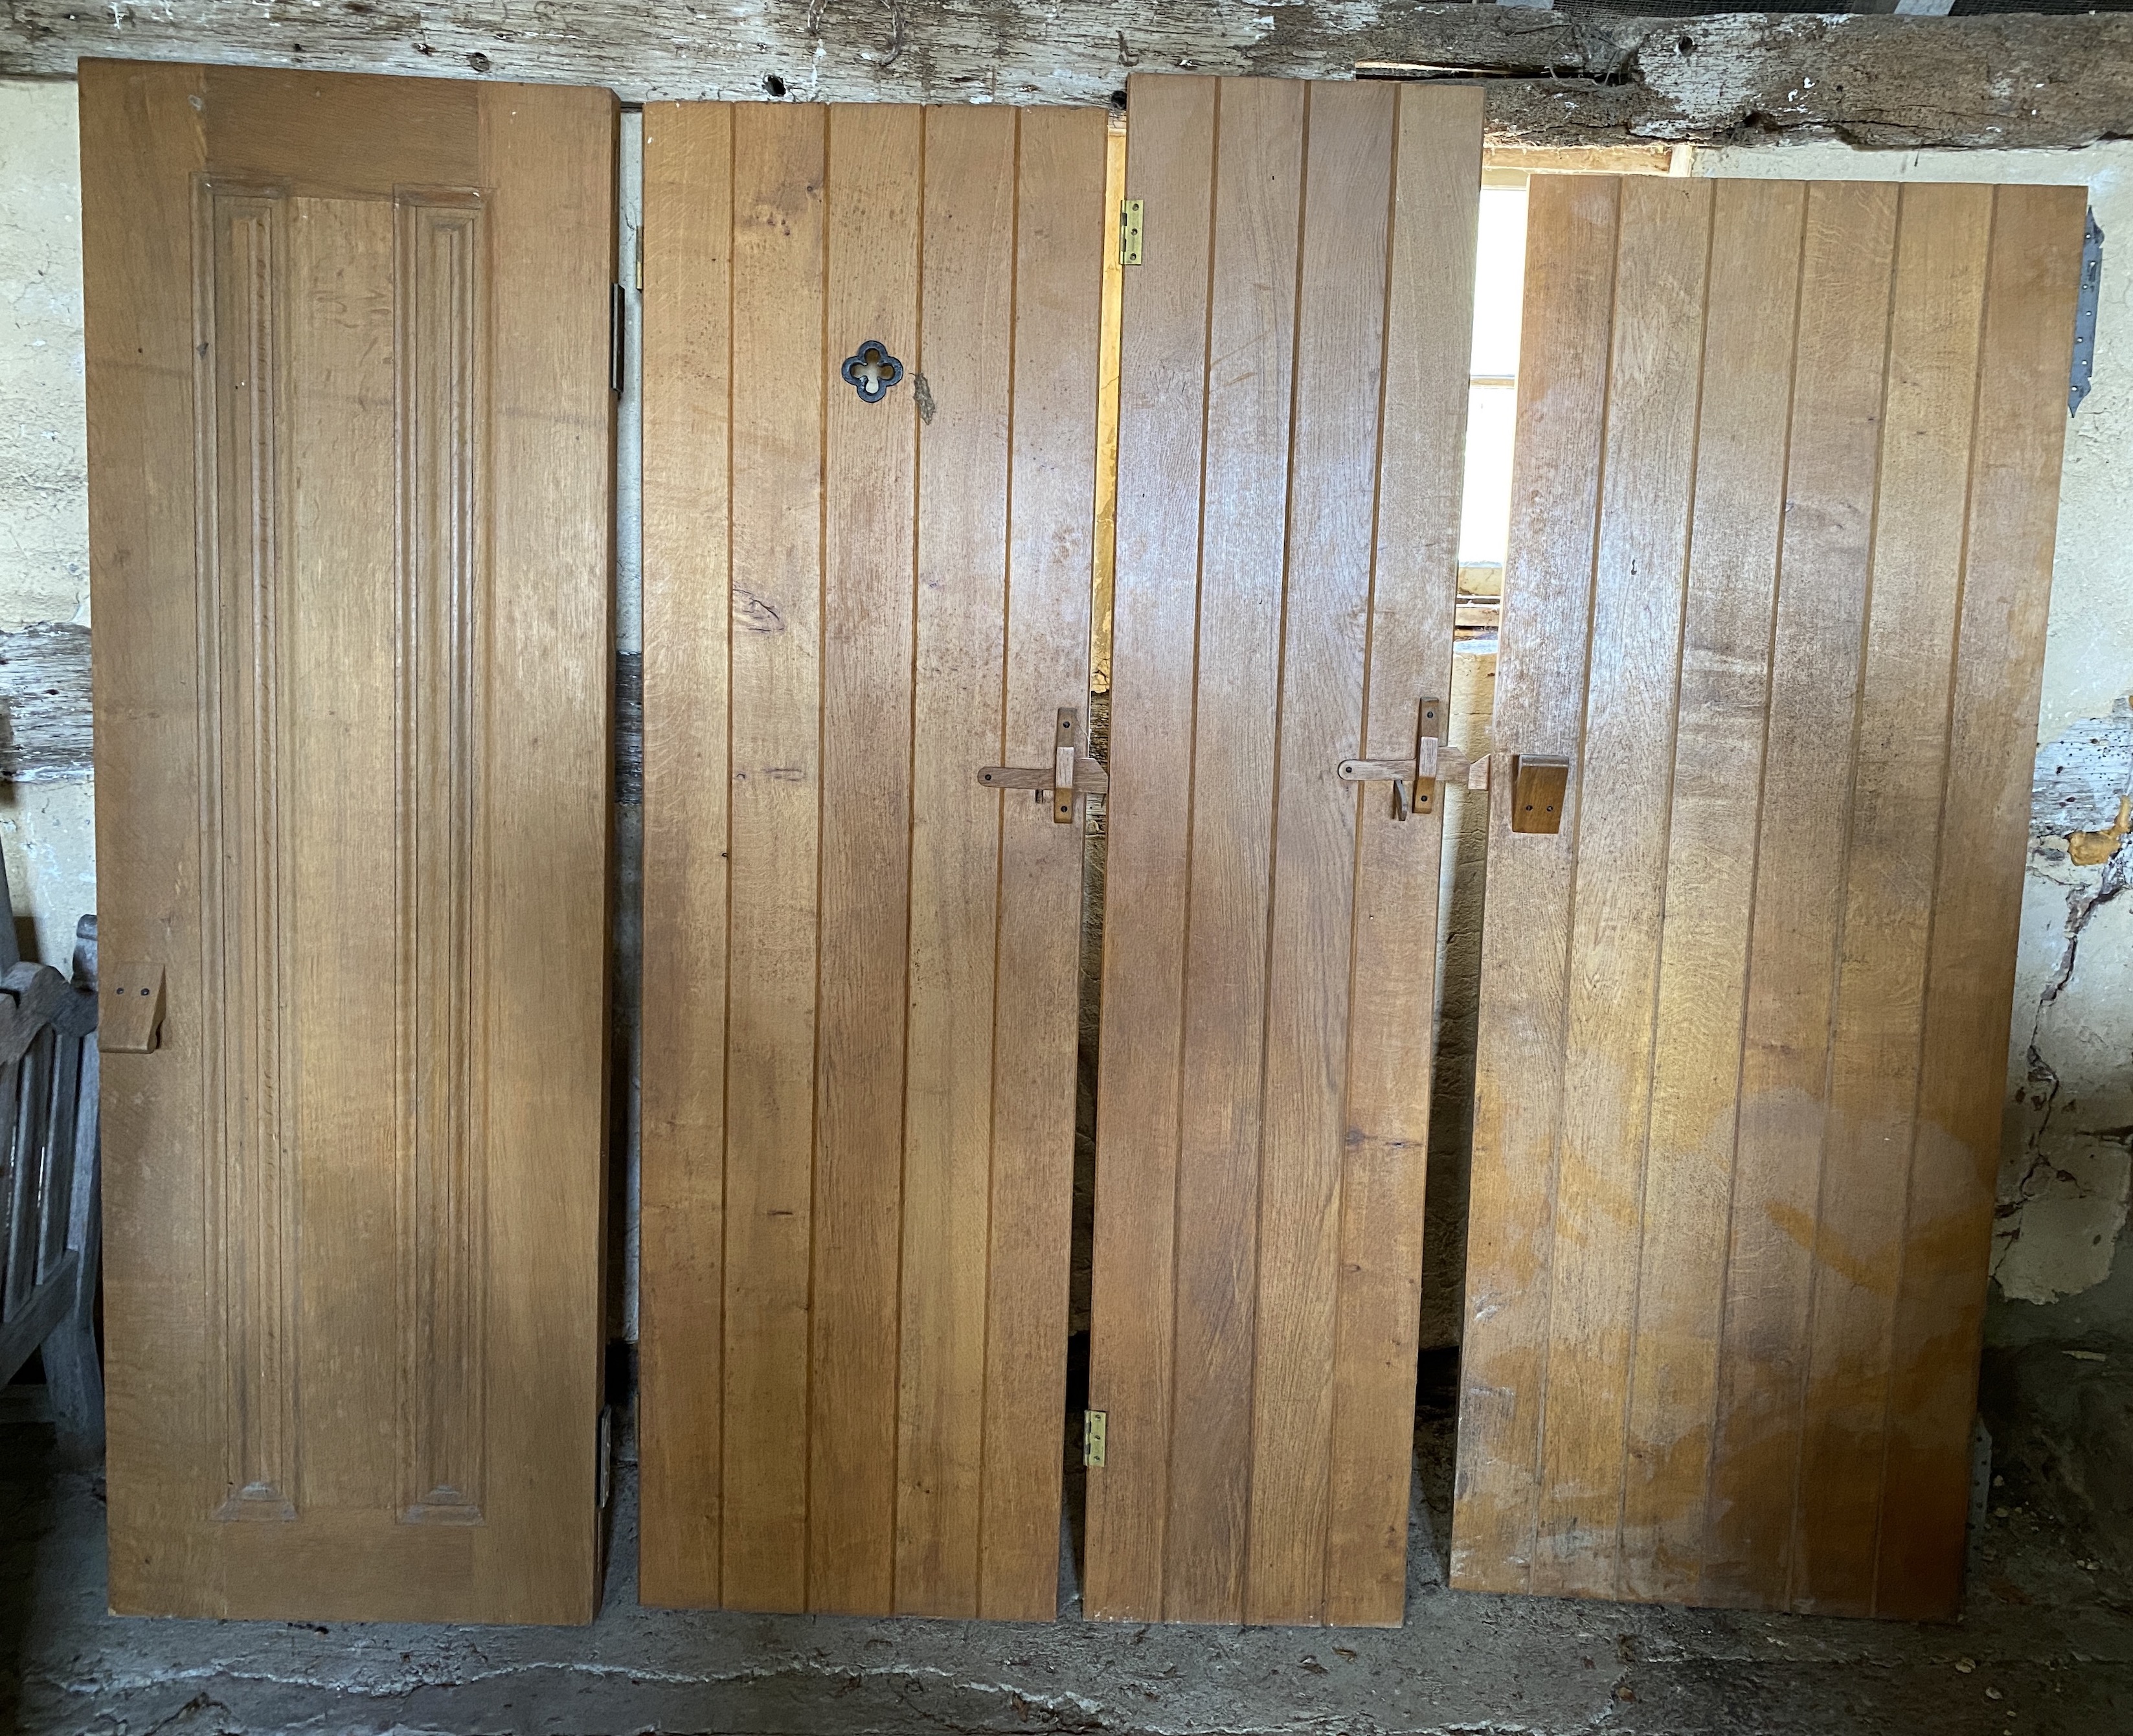 Three solid oak ledged and braced doors, 210 x 58.5cm; 204 x 44.5cm and 95 x 72cm, and a double sided panelled solid oak door, 200 x 64cm (4)                                                                               